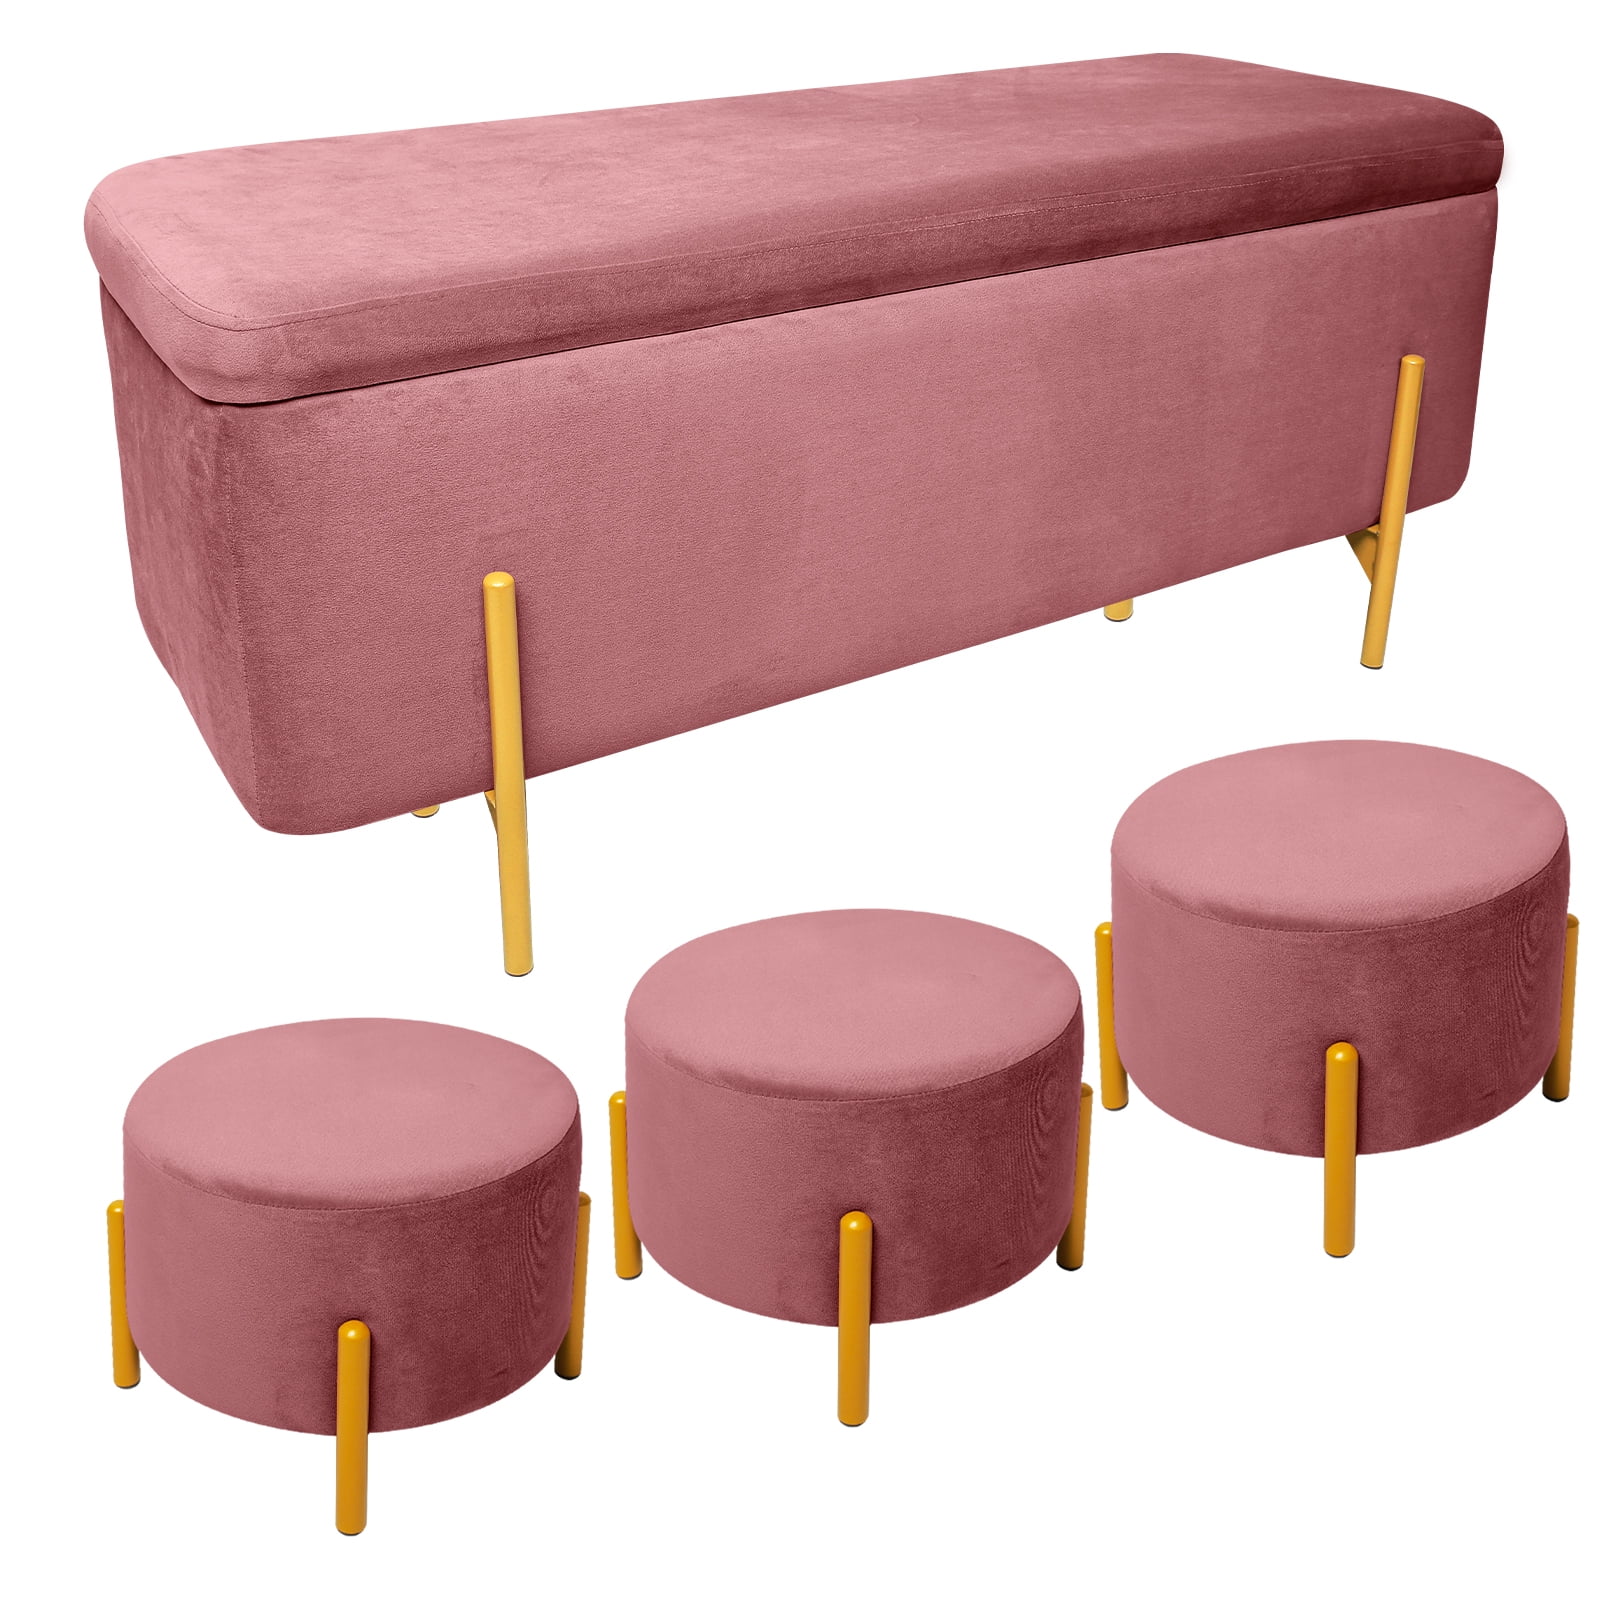 Hofitlead Velvet Storage Ottoman Bench Modern Entryway Bench With 3 Footstools Pink Ce37c5ba 072d 4f32 A60d 20bb0e278125.845cad38217aed827aac33c61dce98e1 